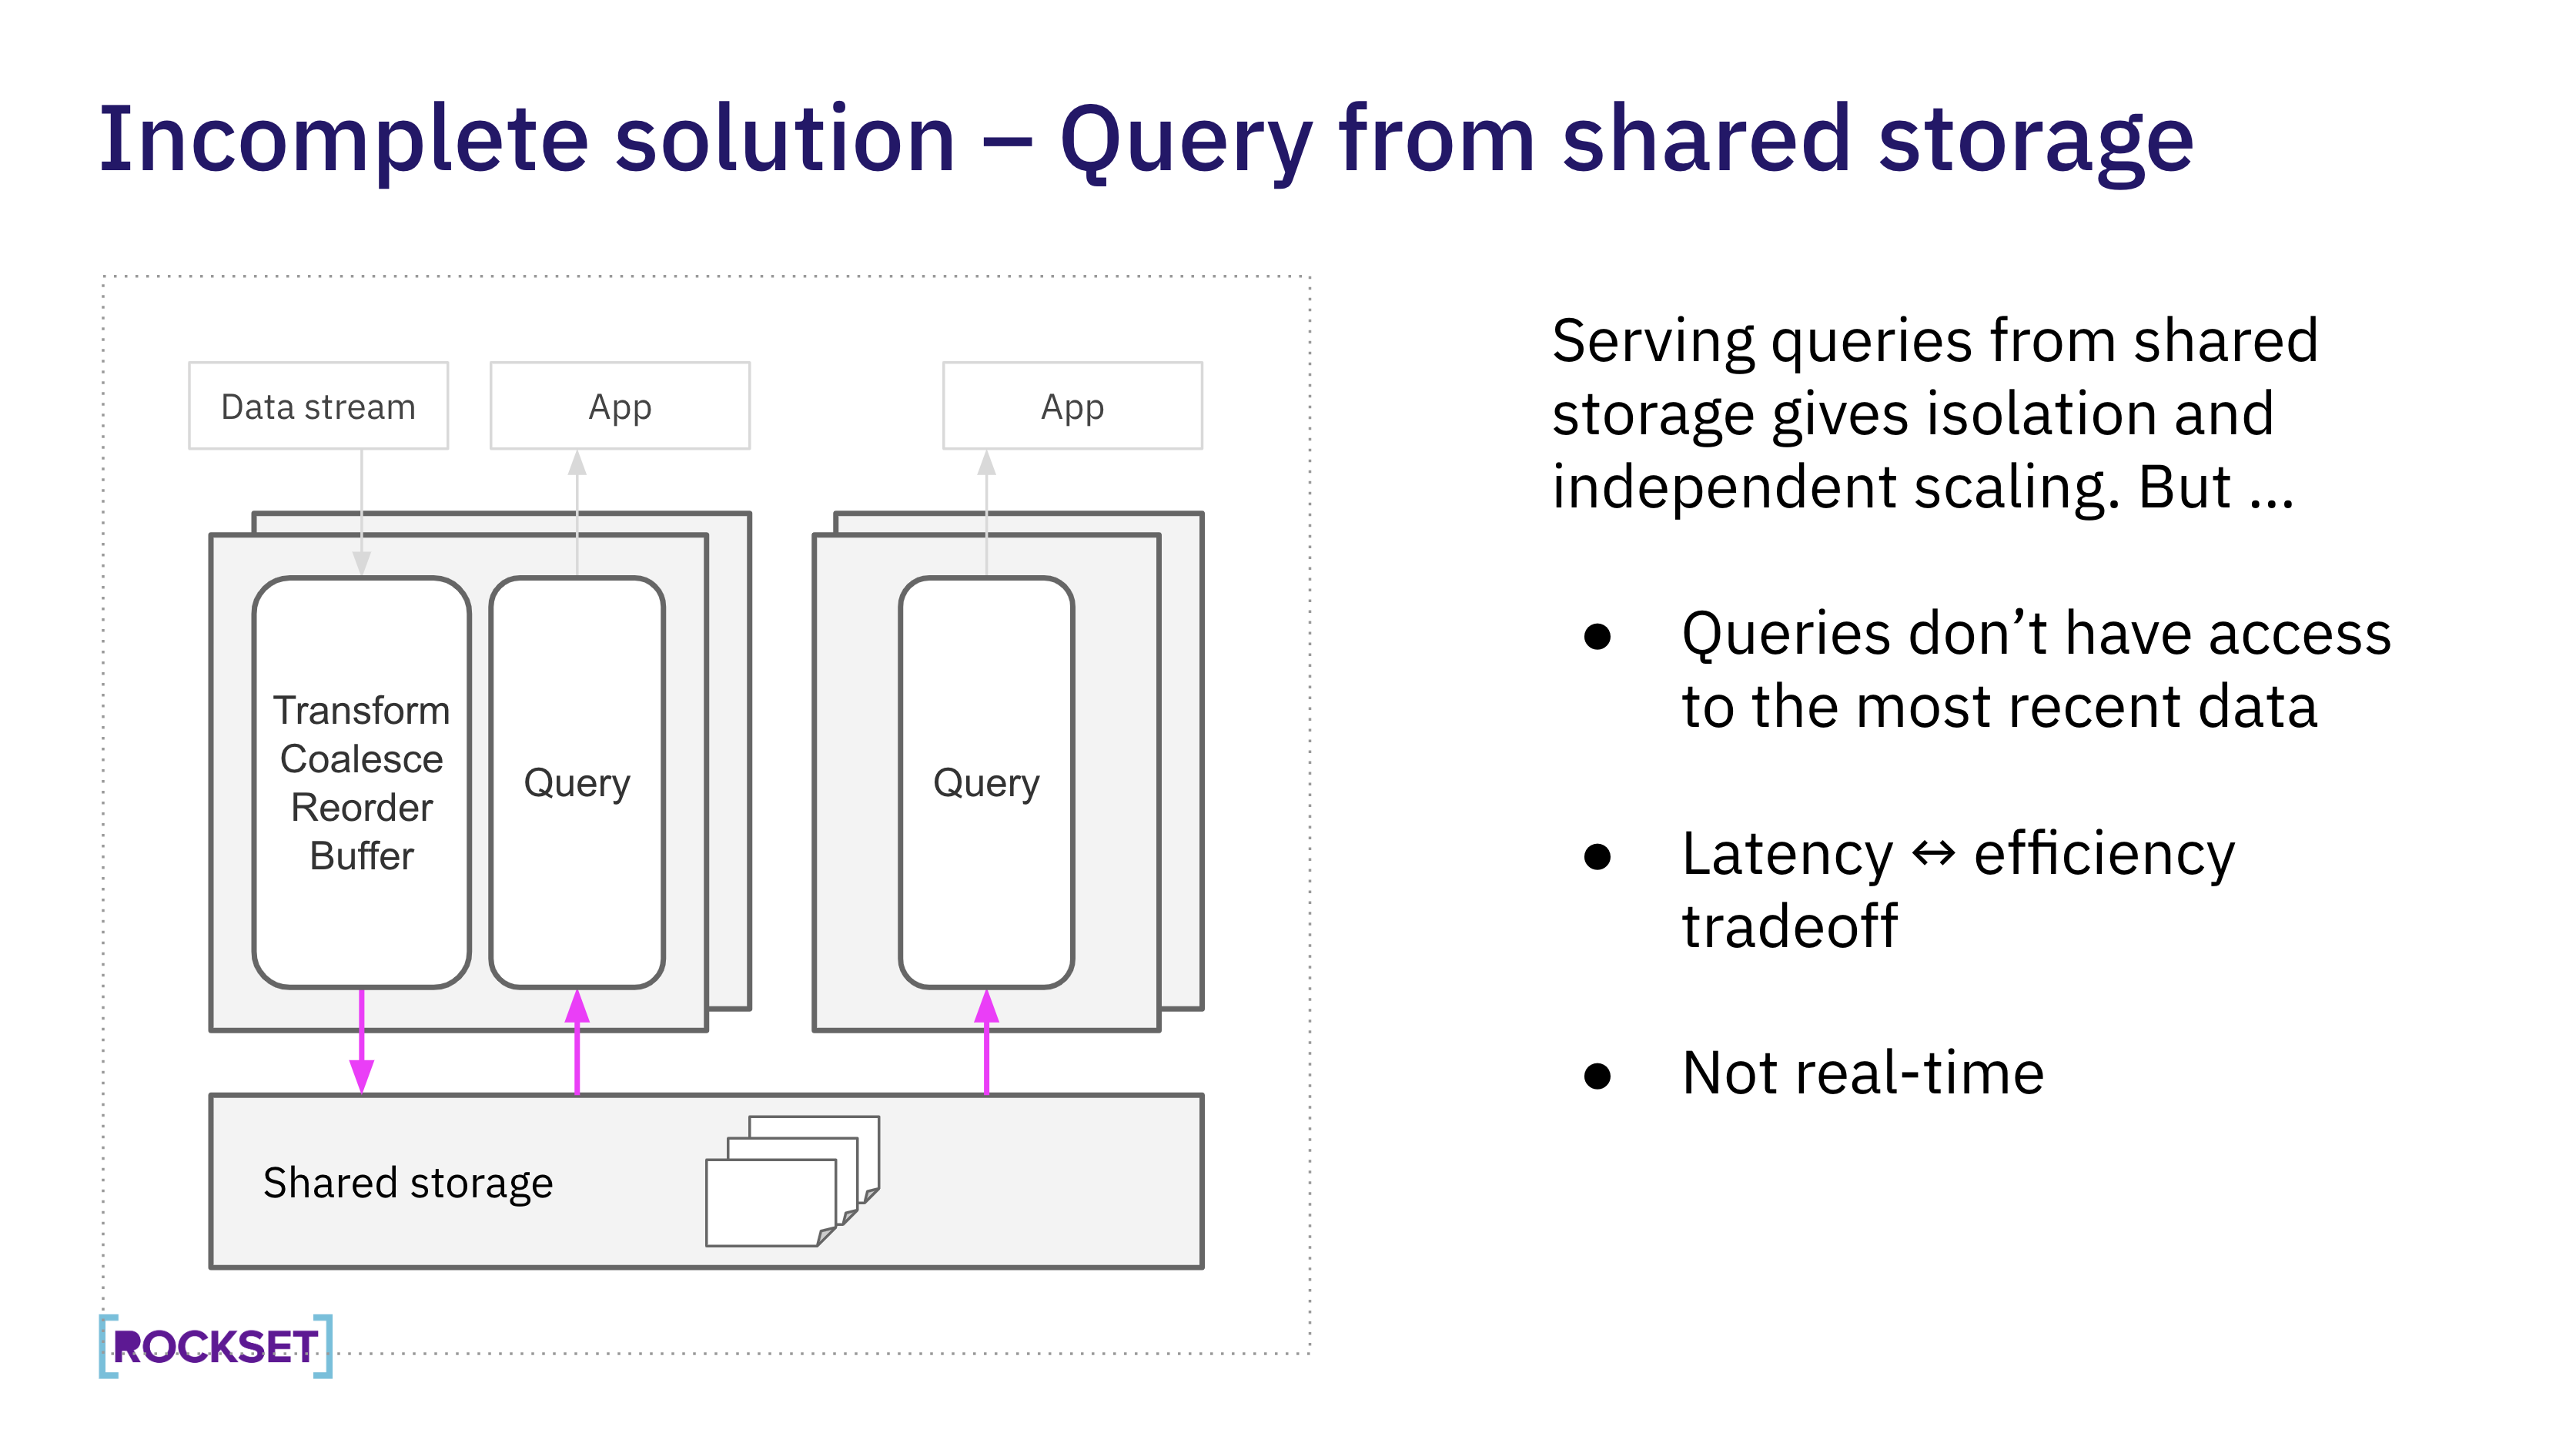 Incomplete solution- Query from shared storage